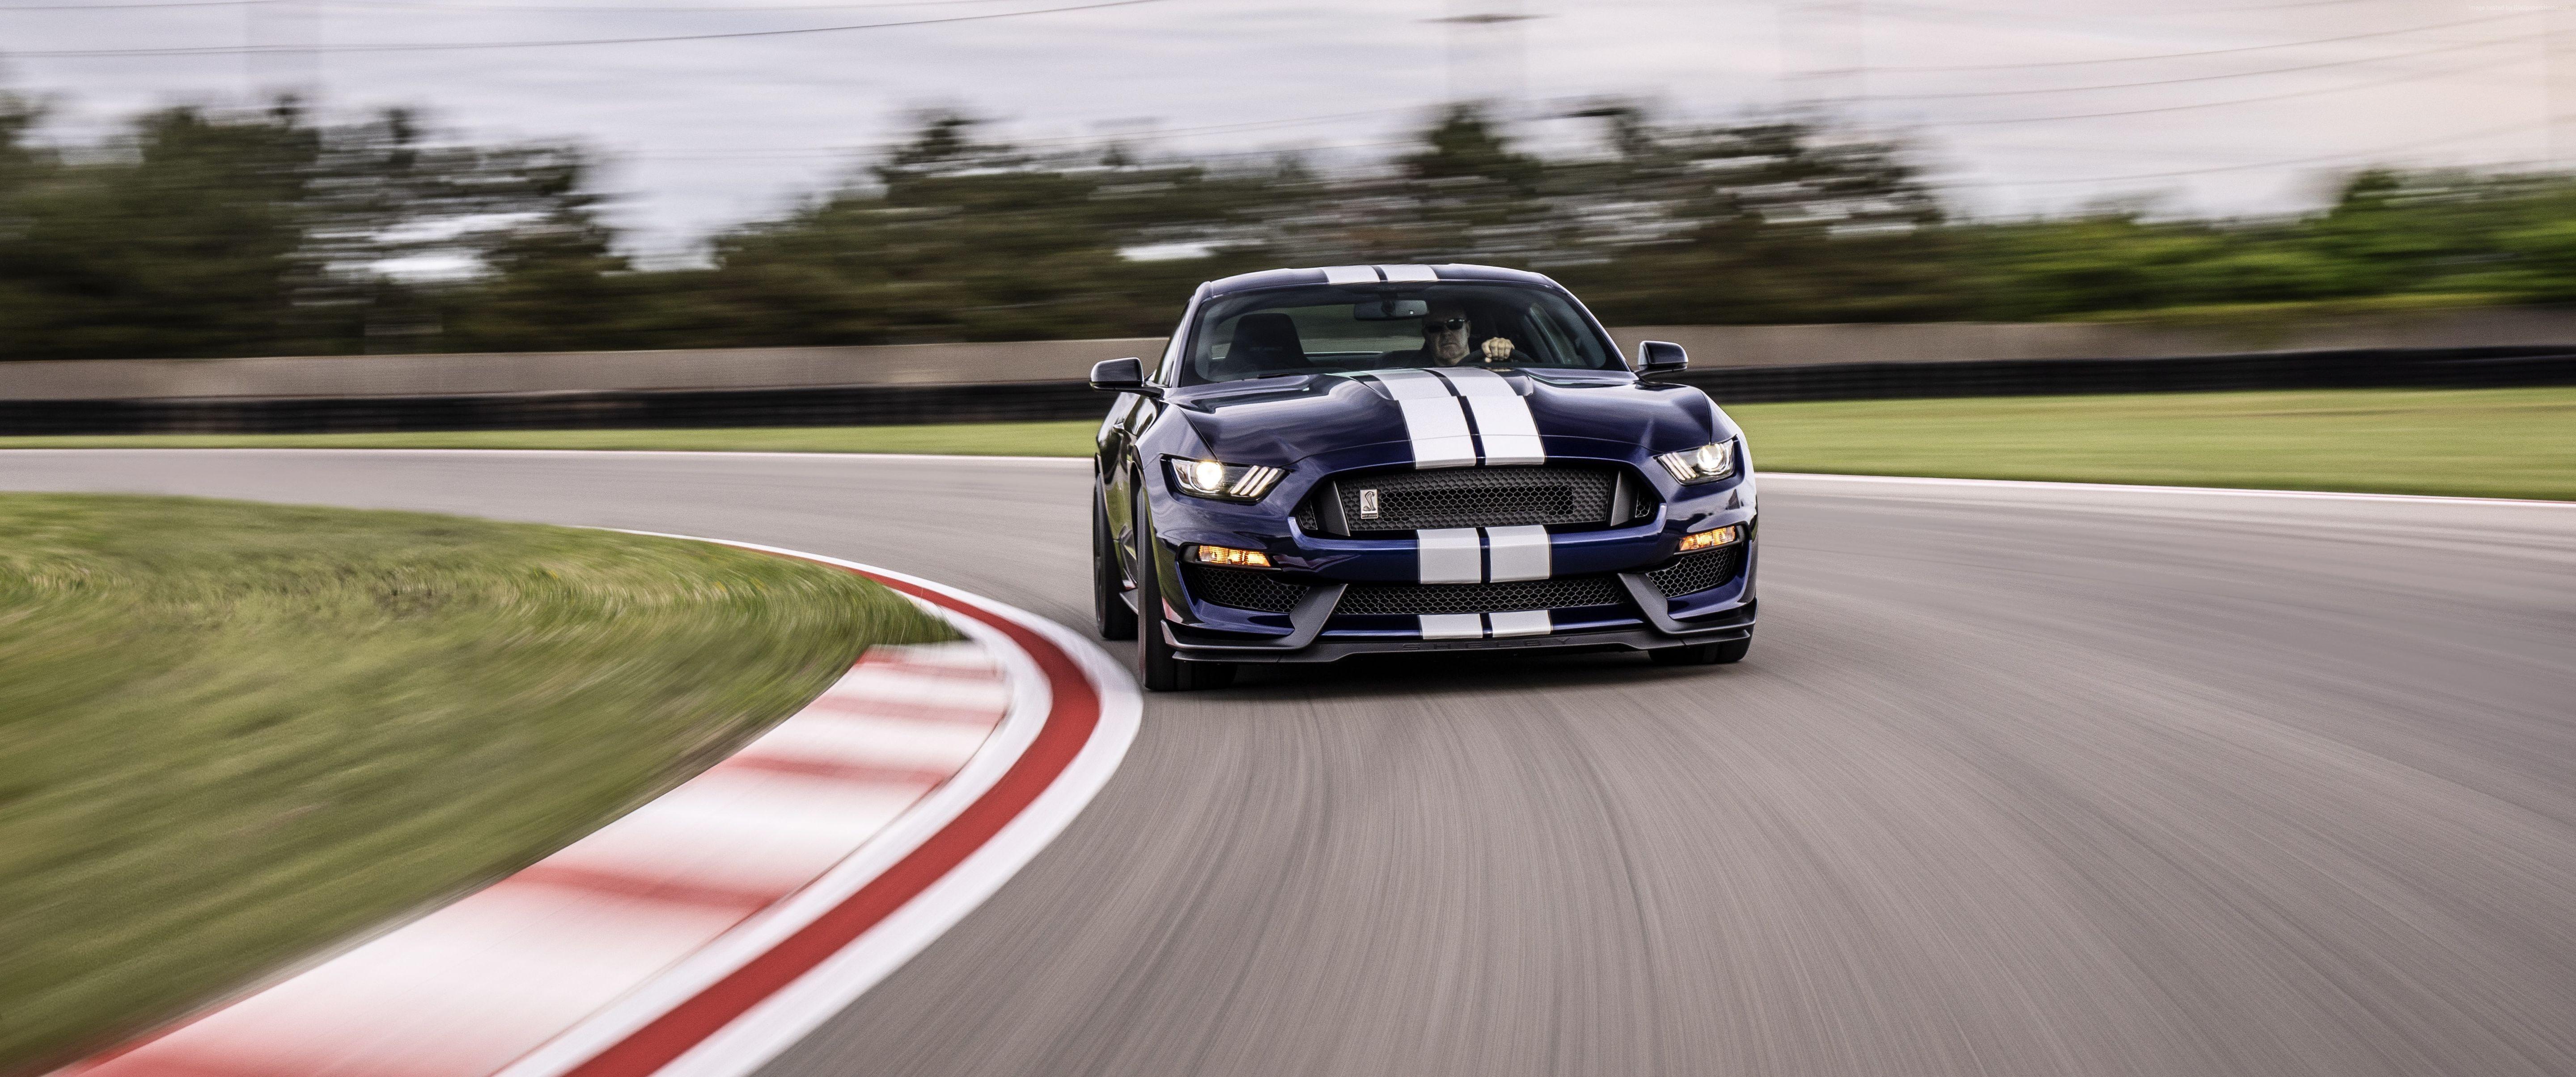 Ford Mustang Shelby GT350, 4K, 2019 Cars